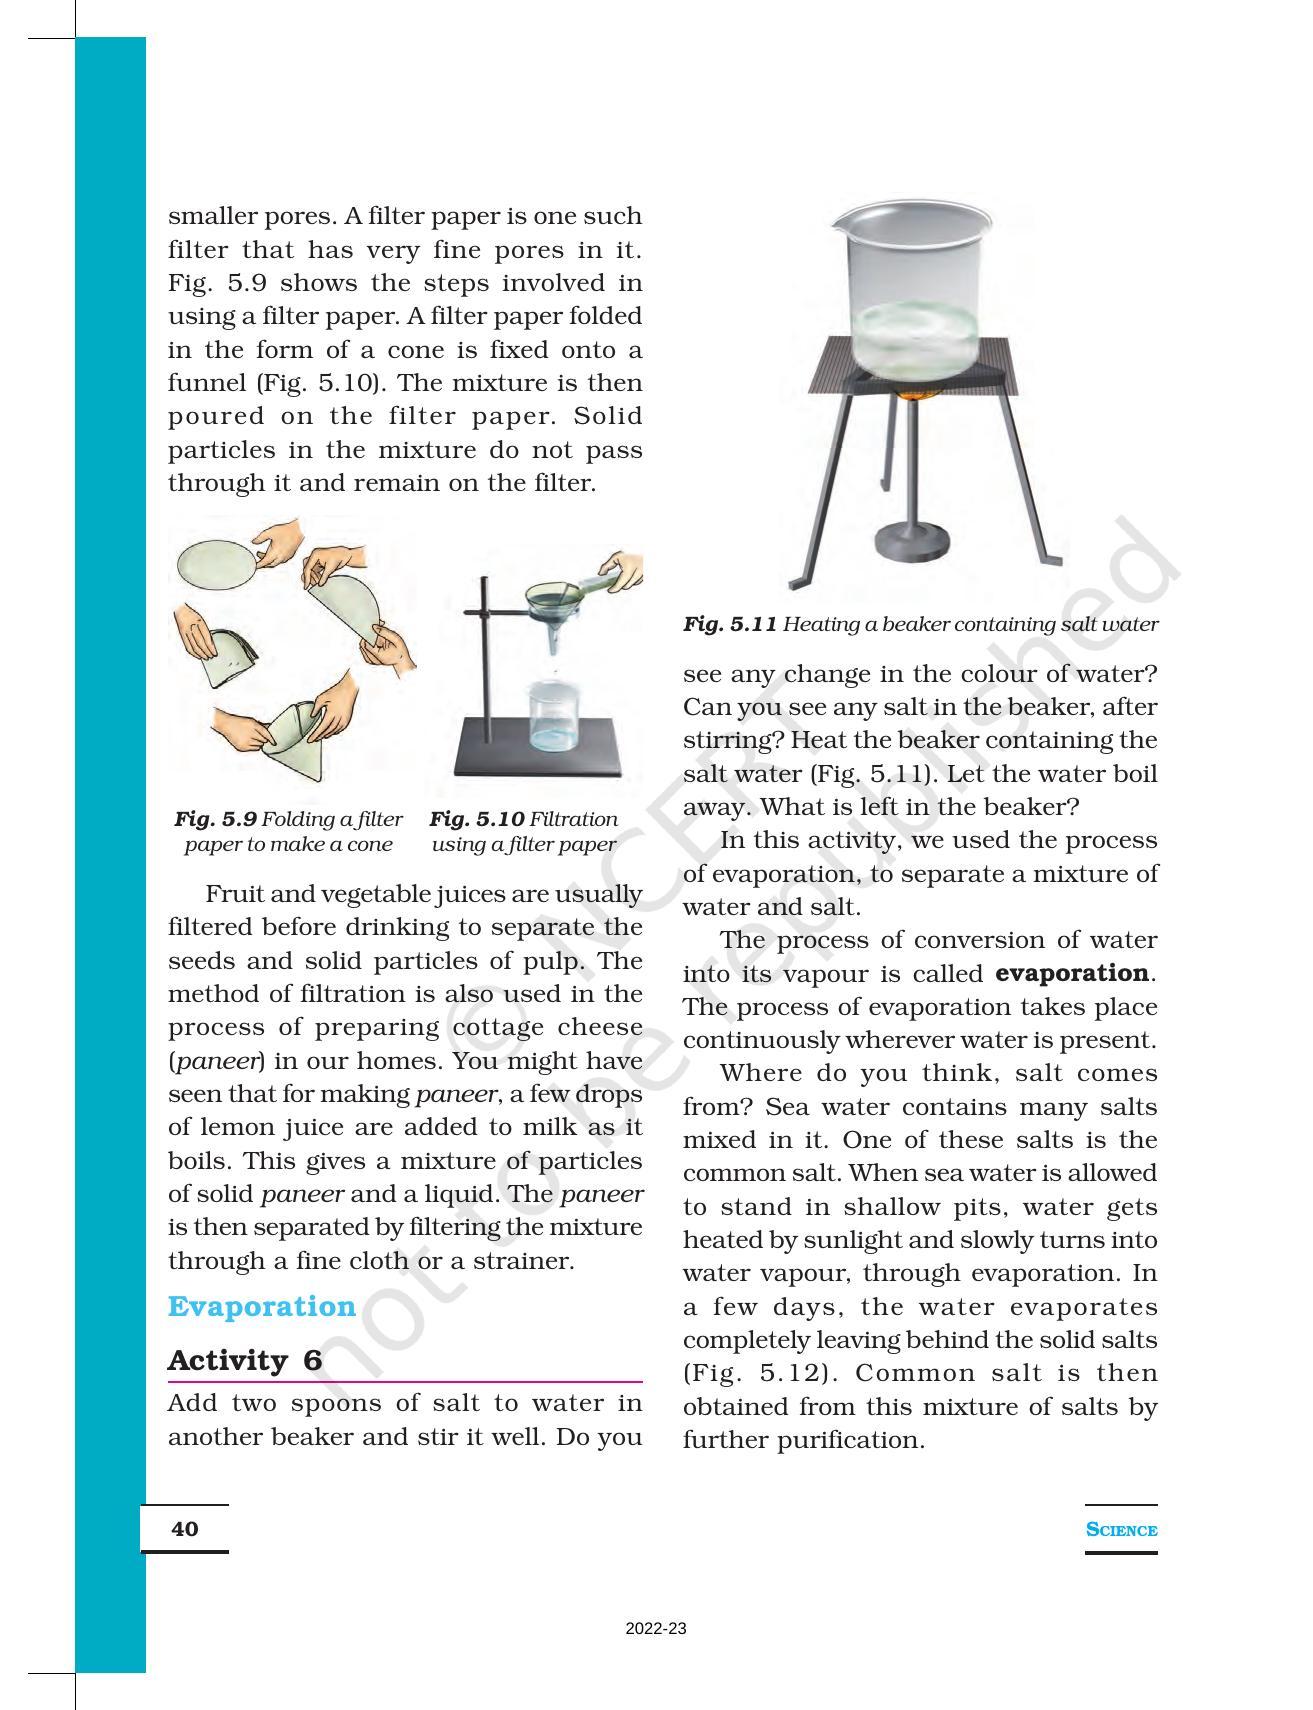 NCERT Book for Class 6 Science: Chapter 5-Separation of Substances - Page 6